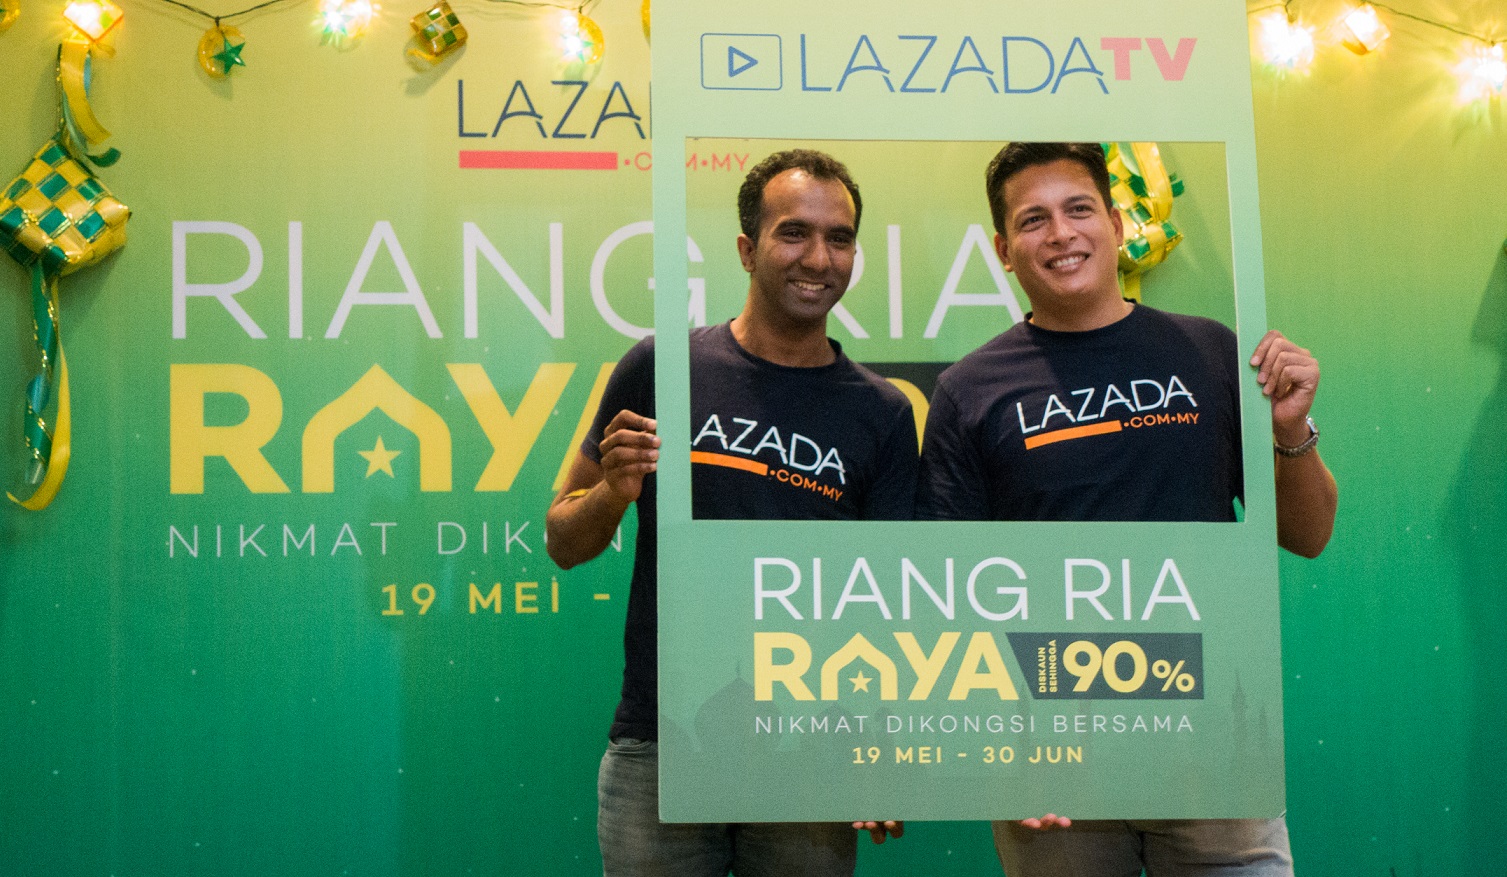 Lazada launches new social commerce channel Lazada TV